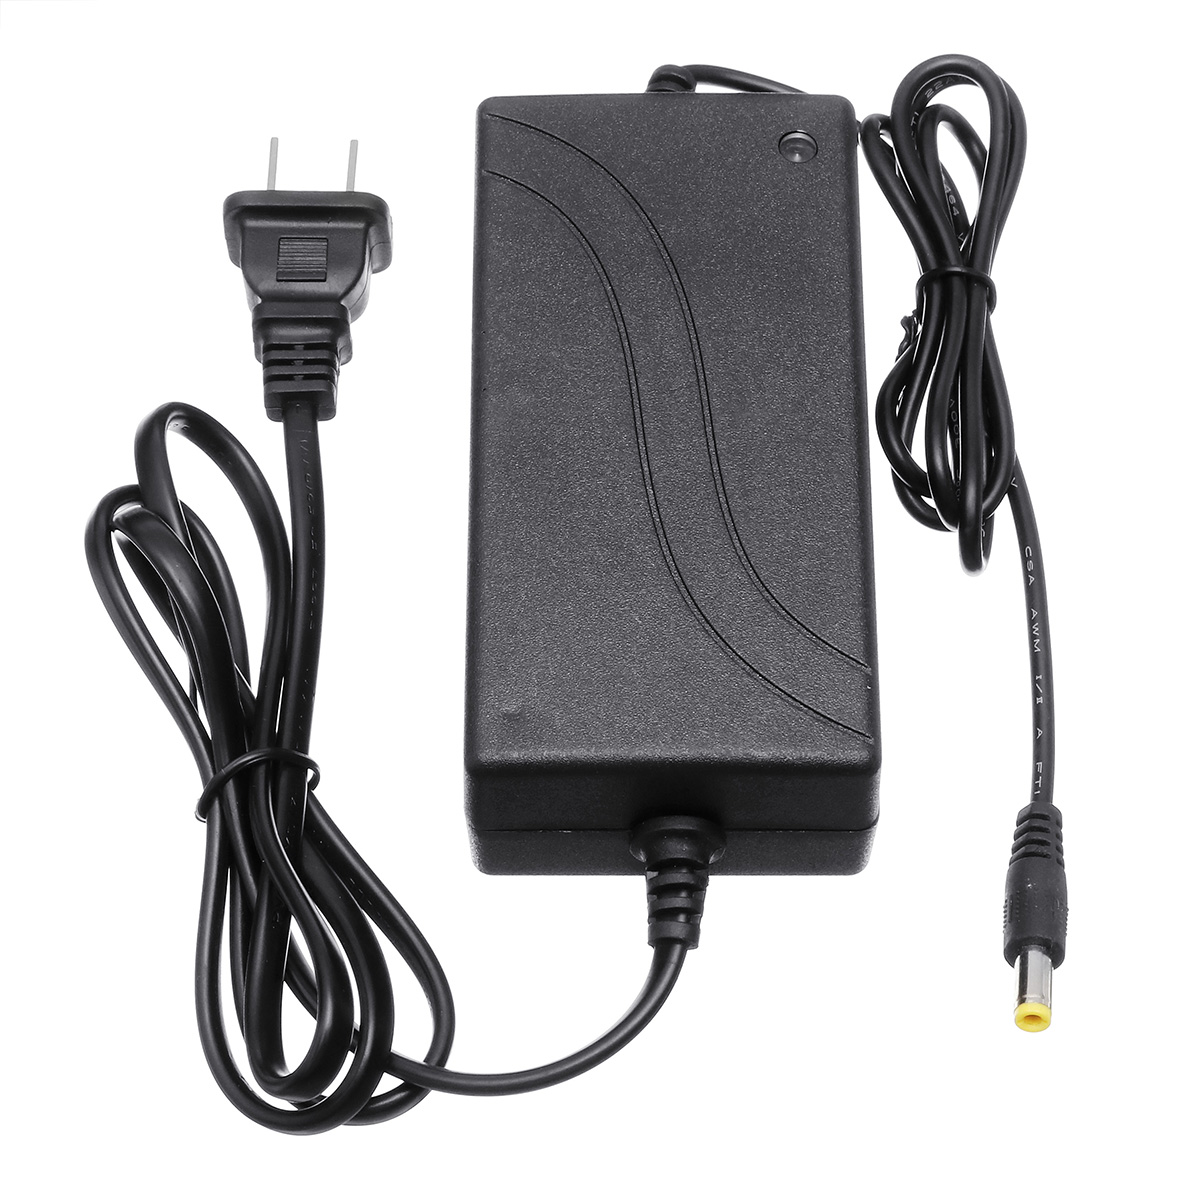 21V 1A/1.5A Fast Charger For DC 21V Electric Drill Wrench Lithium Battery Charger Adapter